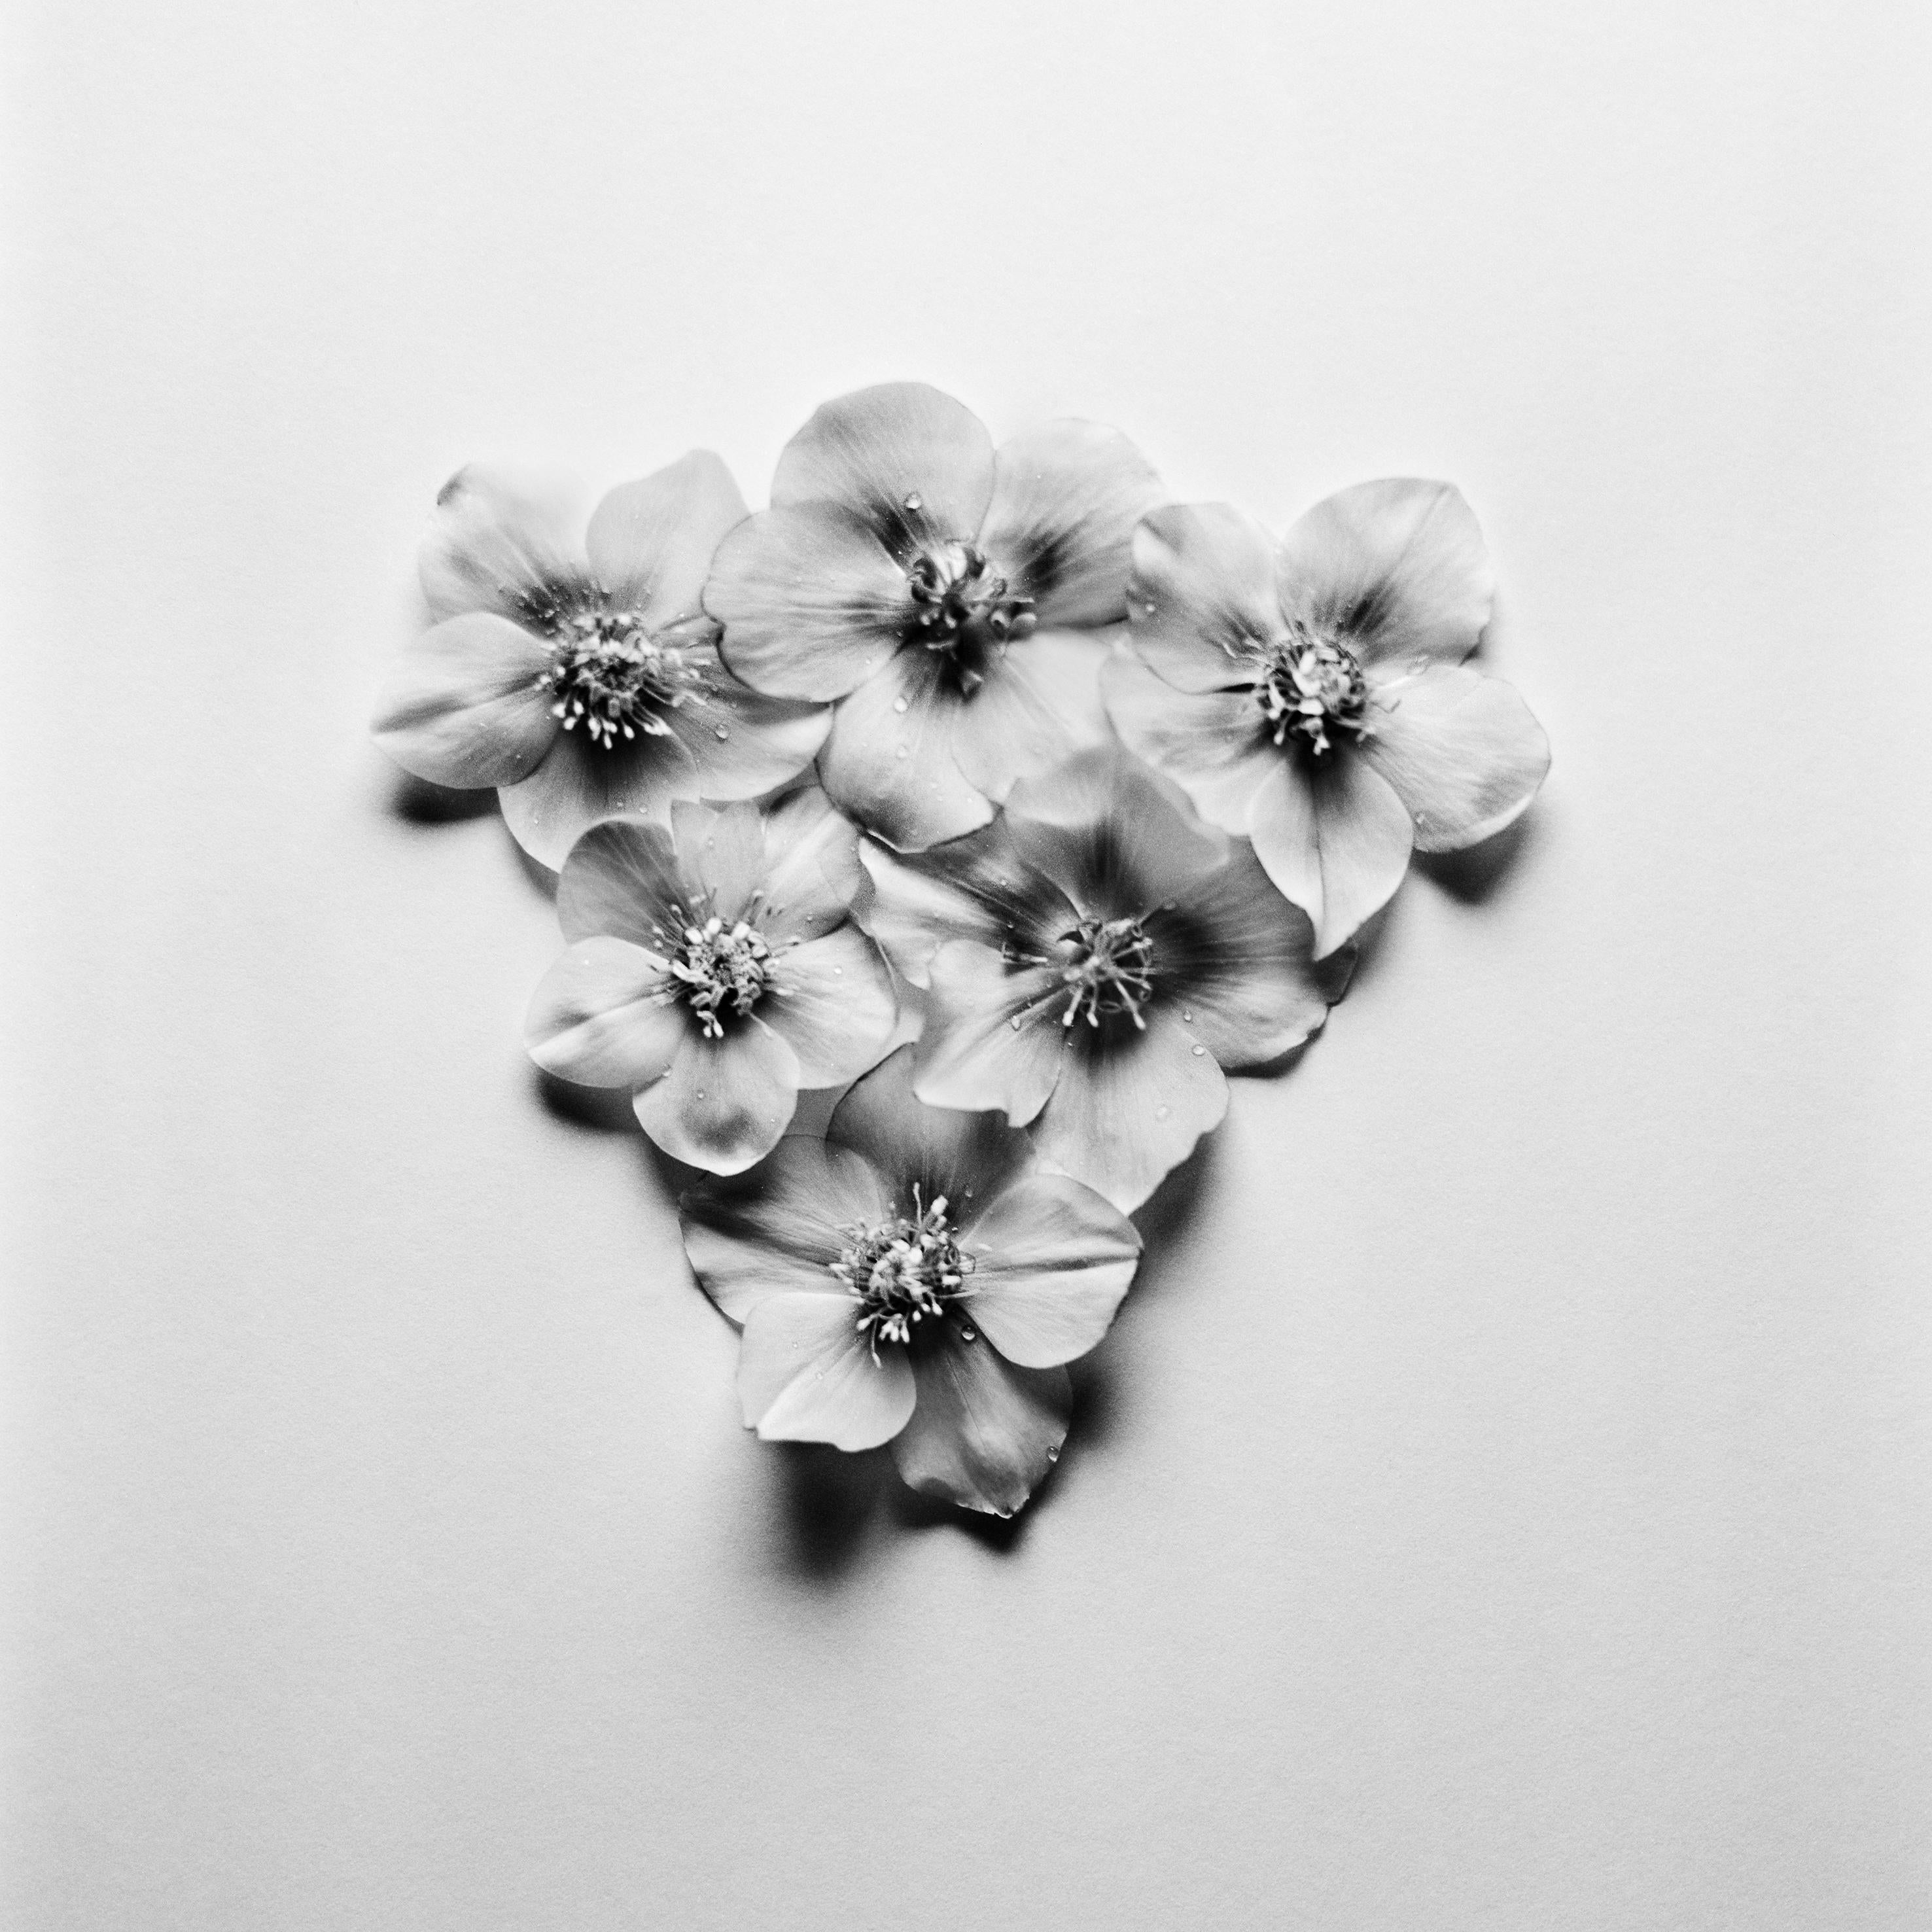 Ugne Pouwell Black and White Photograph - Black Hellebore No.3 - analogue black and white floral photography